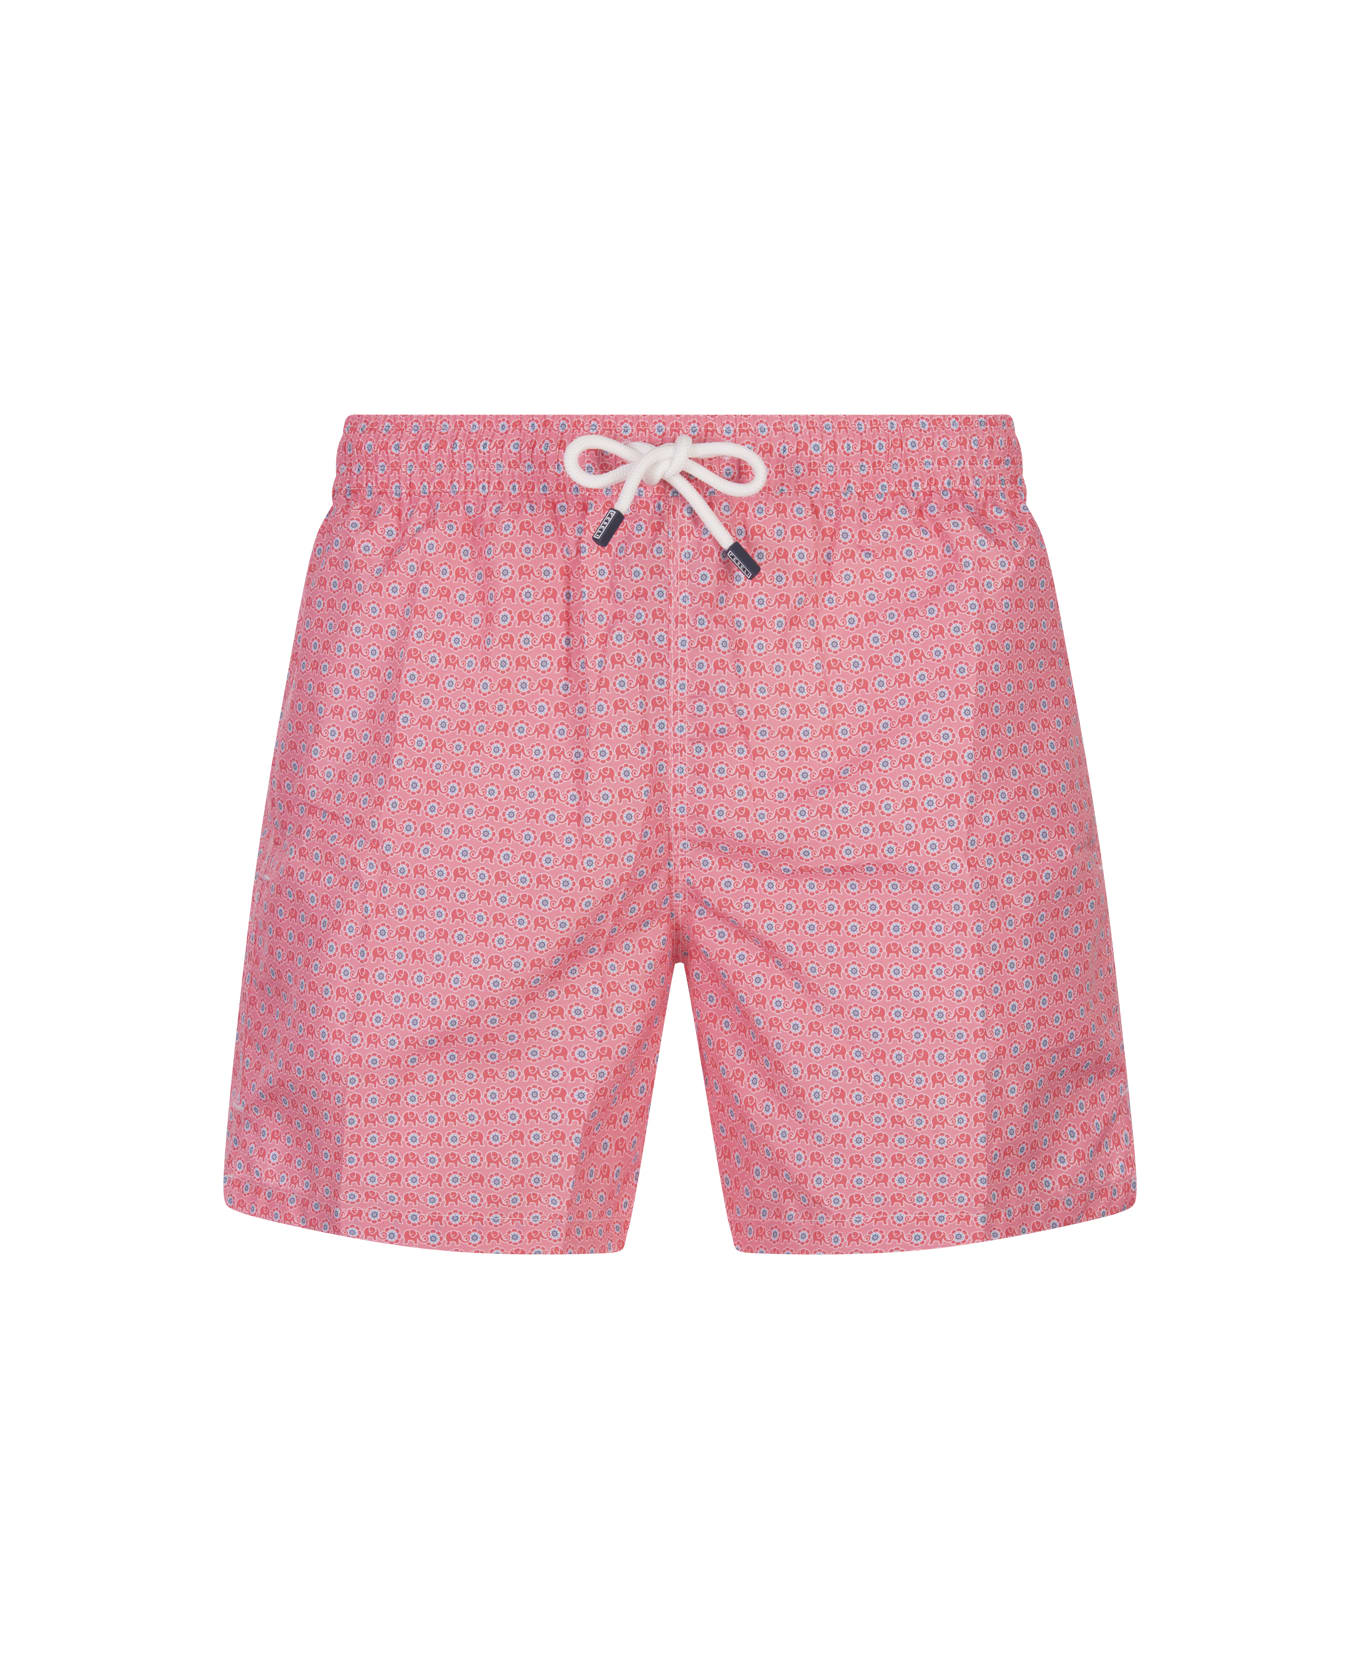 Fedeli Pink Swim Shorts With Elephants And Flowers Pattern - Pink